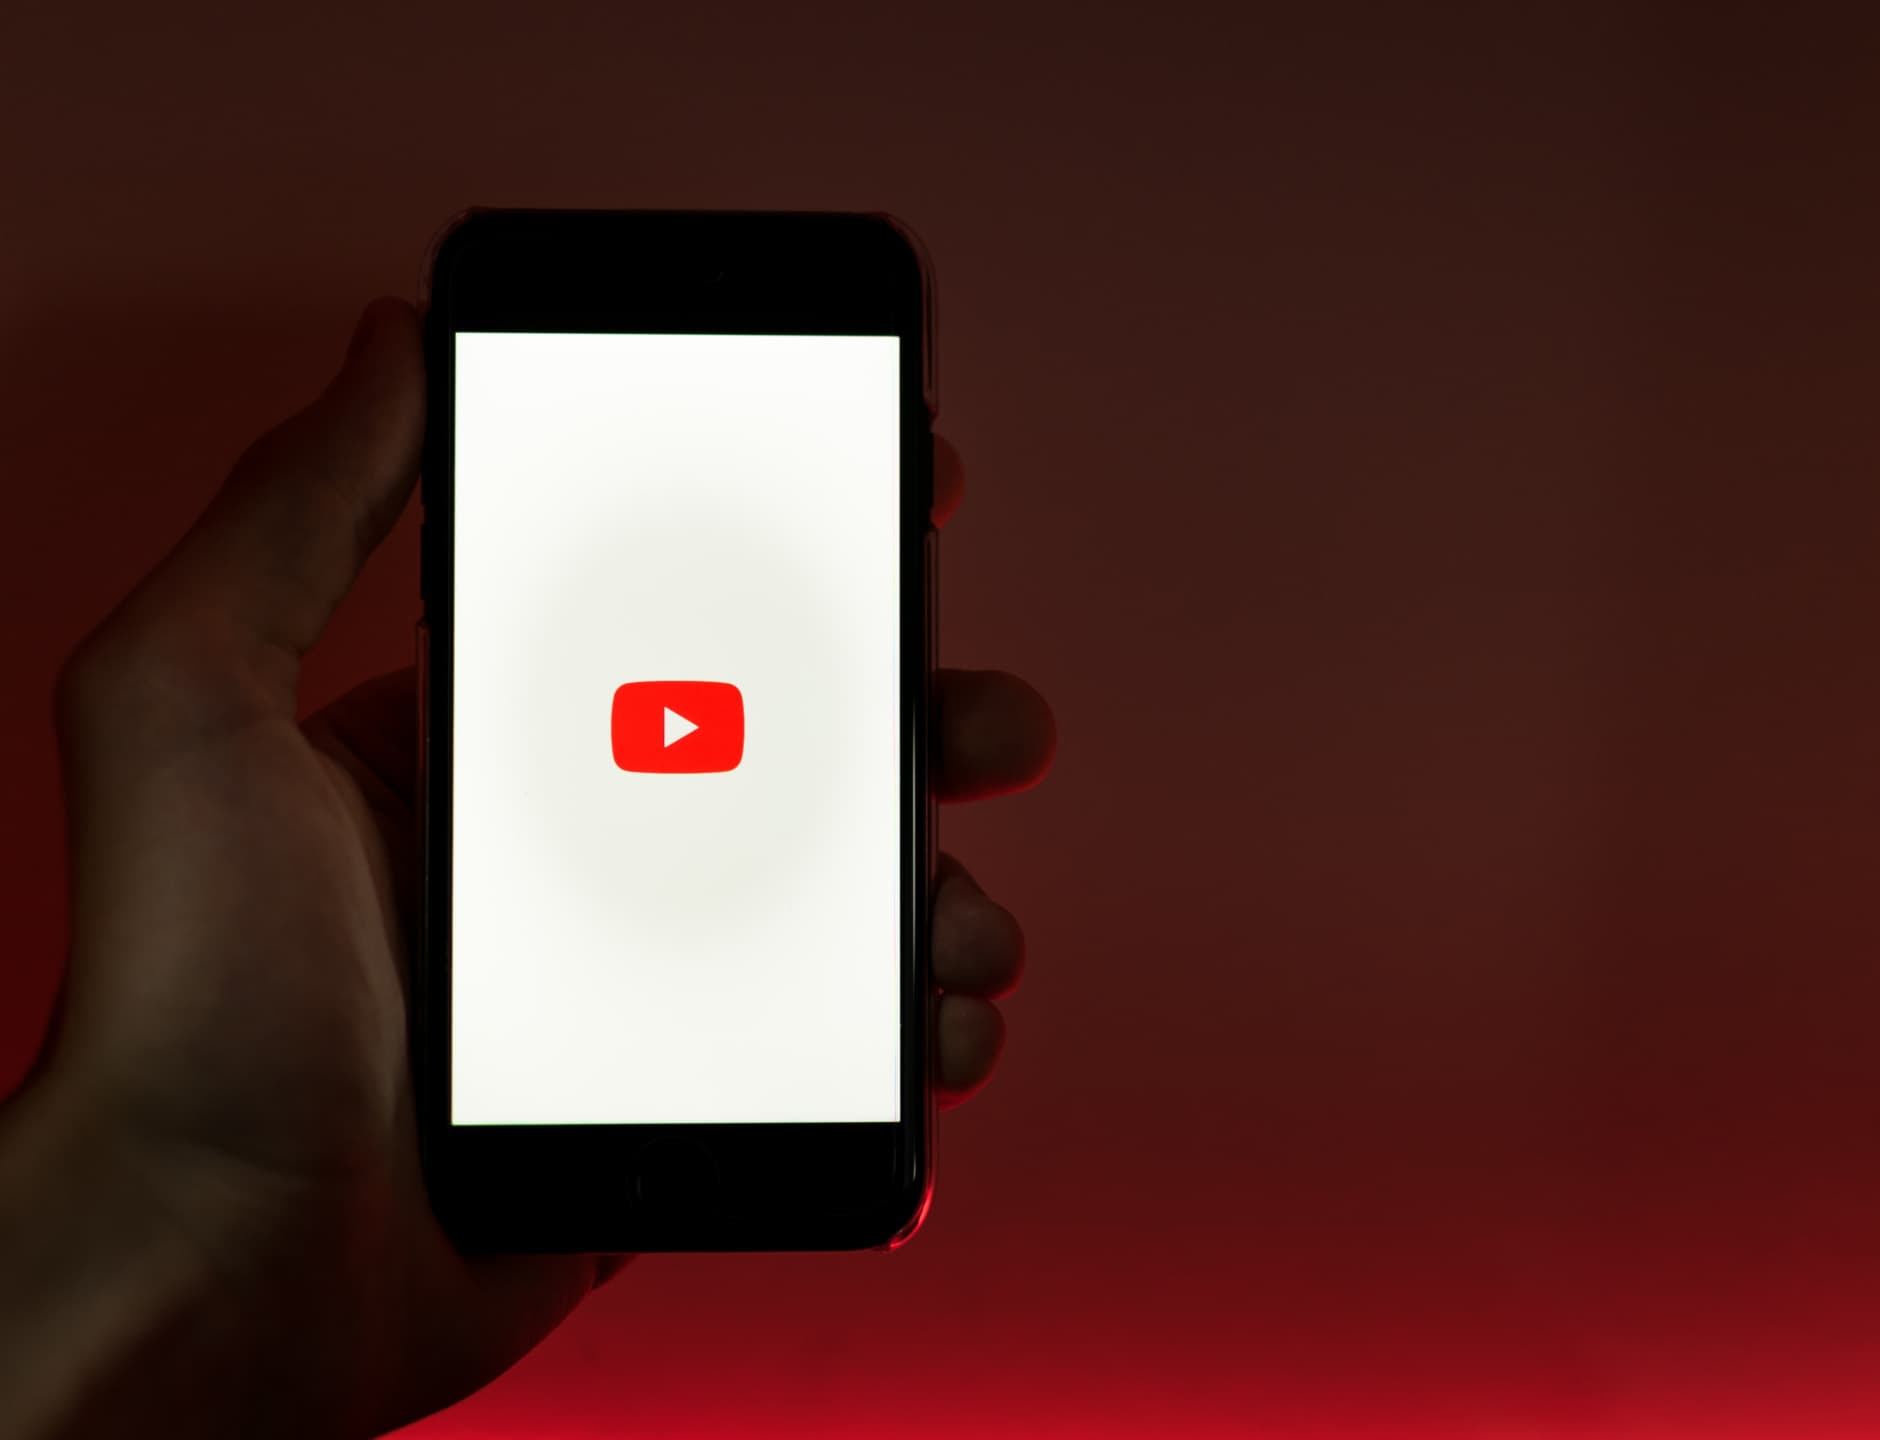 YouTube creators can form better brand partnerships